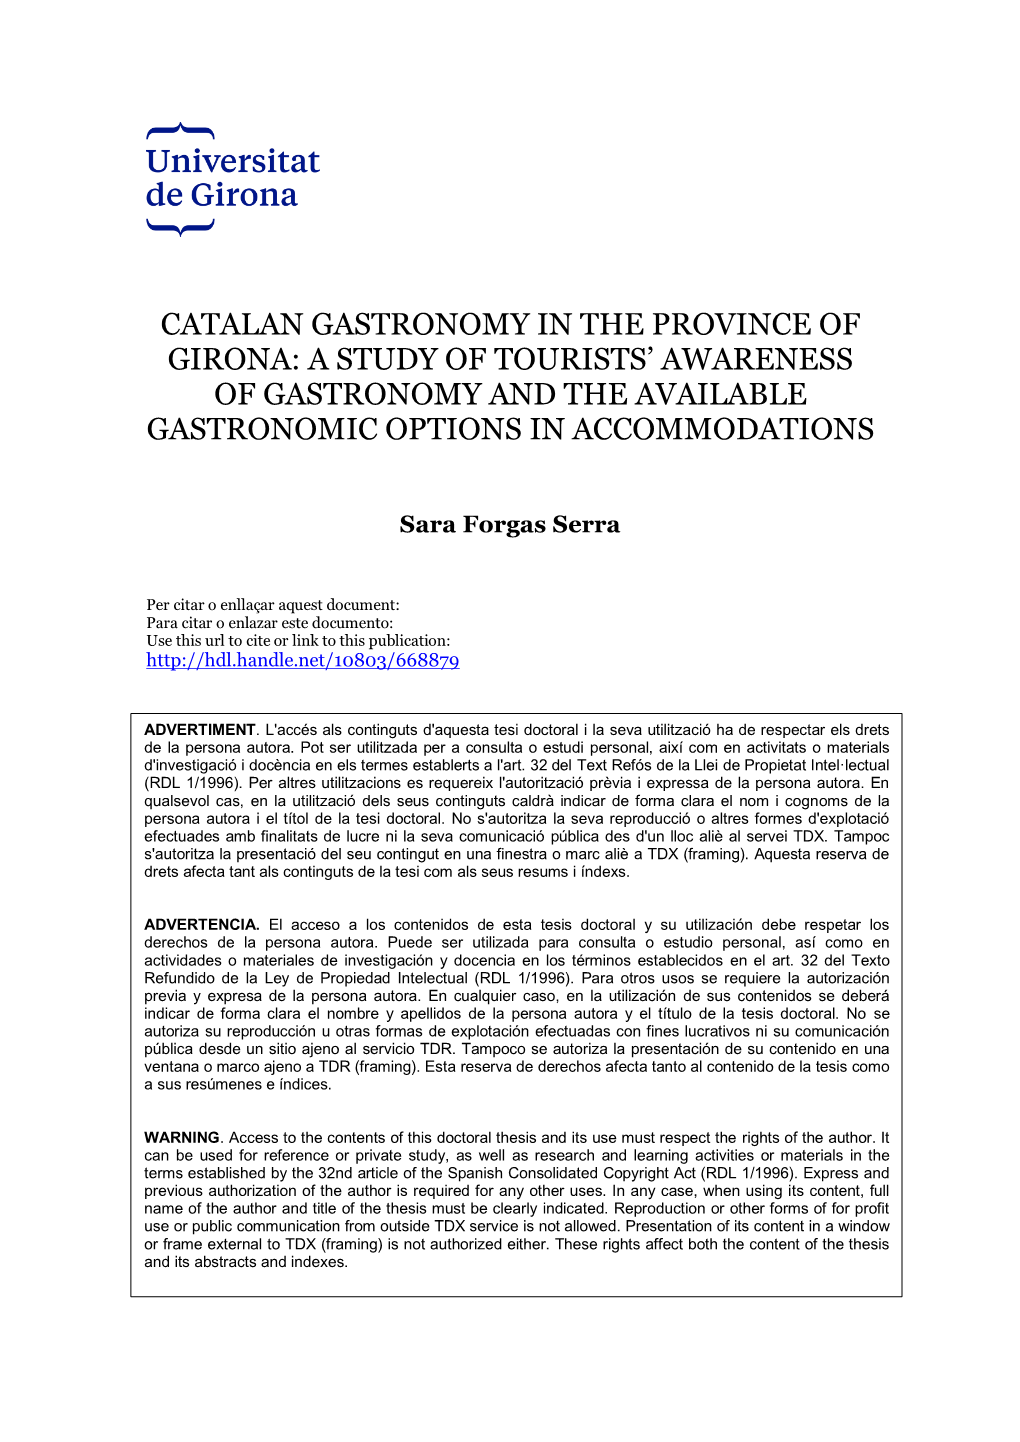 Catalan Gastronomy in the Province of Girona: a Study of Tourists’ Awareness of Gastronomy and the Available Gastronomic Options in Accommodations